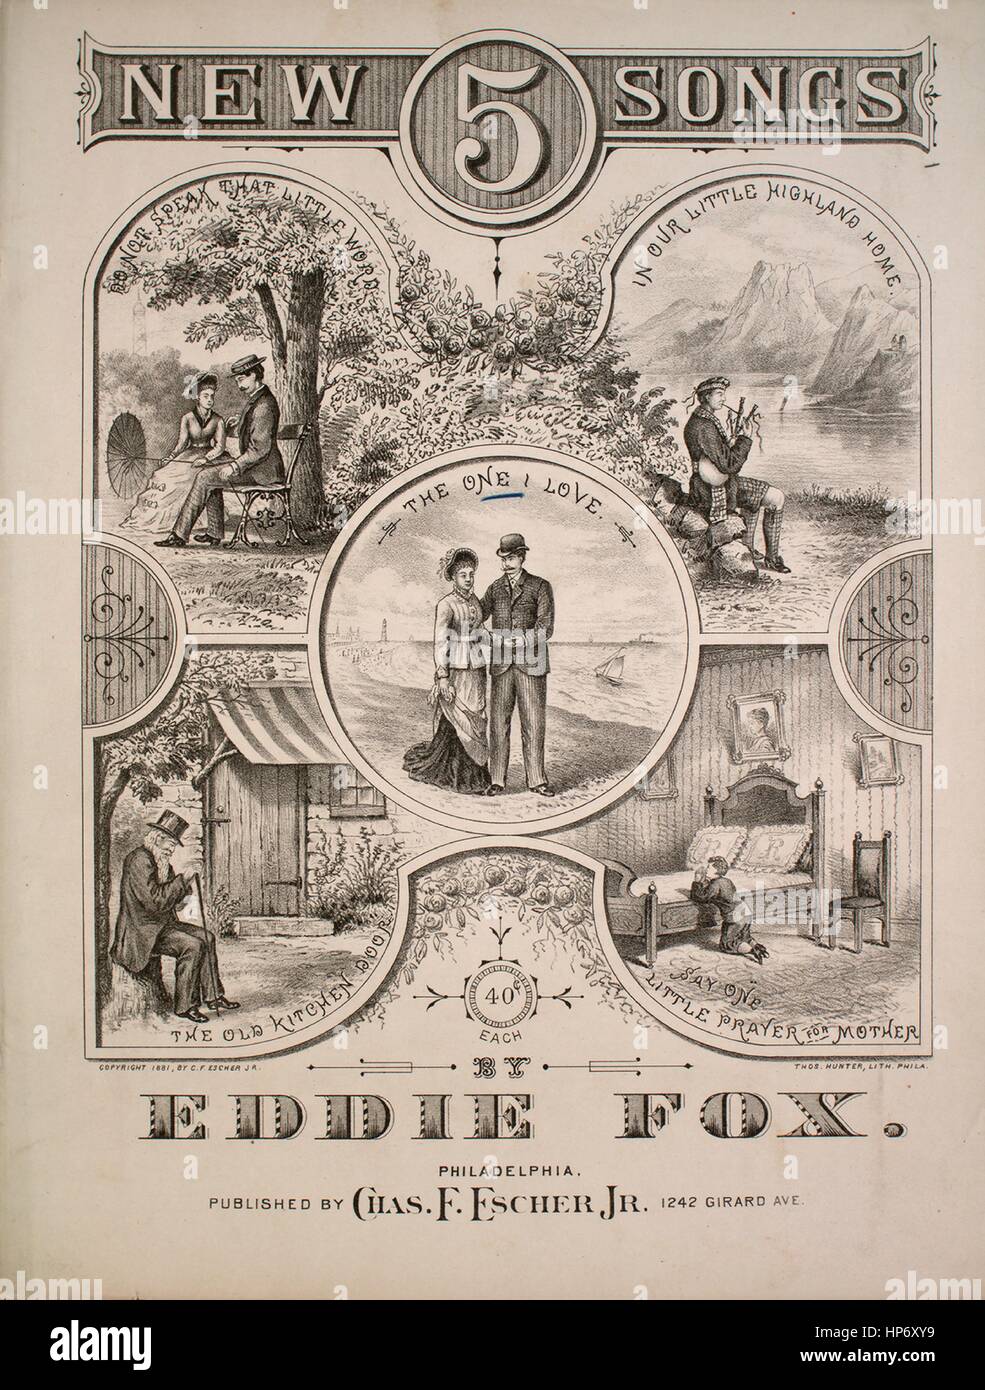 Sheet music cover image of the song '5 New Songs The One I Love Waltz Song', with original authorship notes reading 'By Eddie Fox', United States, 1881. The publisher is listed as 'Chas. F. Escher, Jr., 1242 Girard Ave.', the form of composition is 'strophic with chorus', the instrumentation is 'piano and voice (solo and satb chorus)', the first line reads 'Dear little Jennie, love of my heart, kiss me good-bye for now we must part', and the illustration artist is listed as 'Thos. Hunter, Lith. Phila.'. Stock Photo